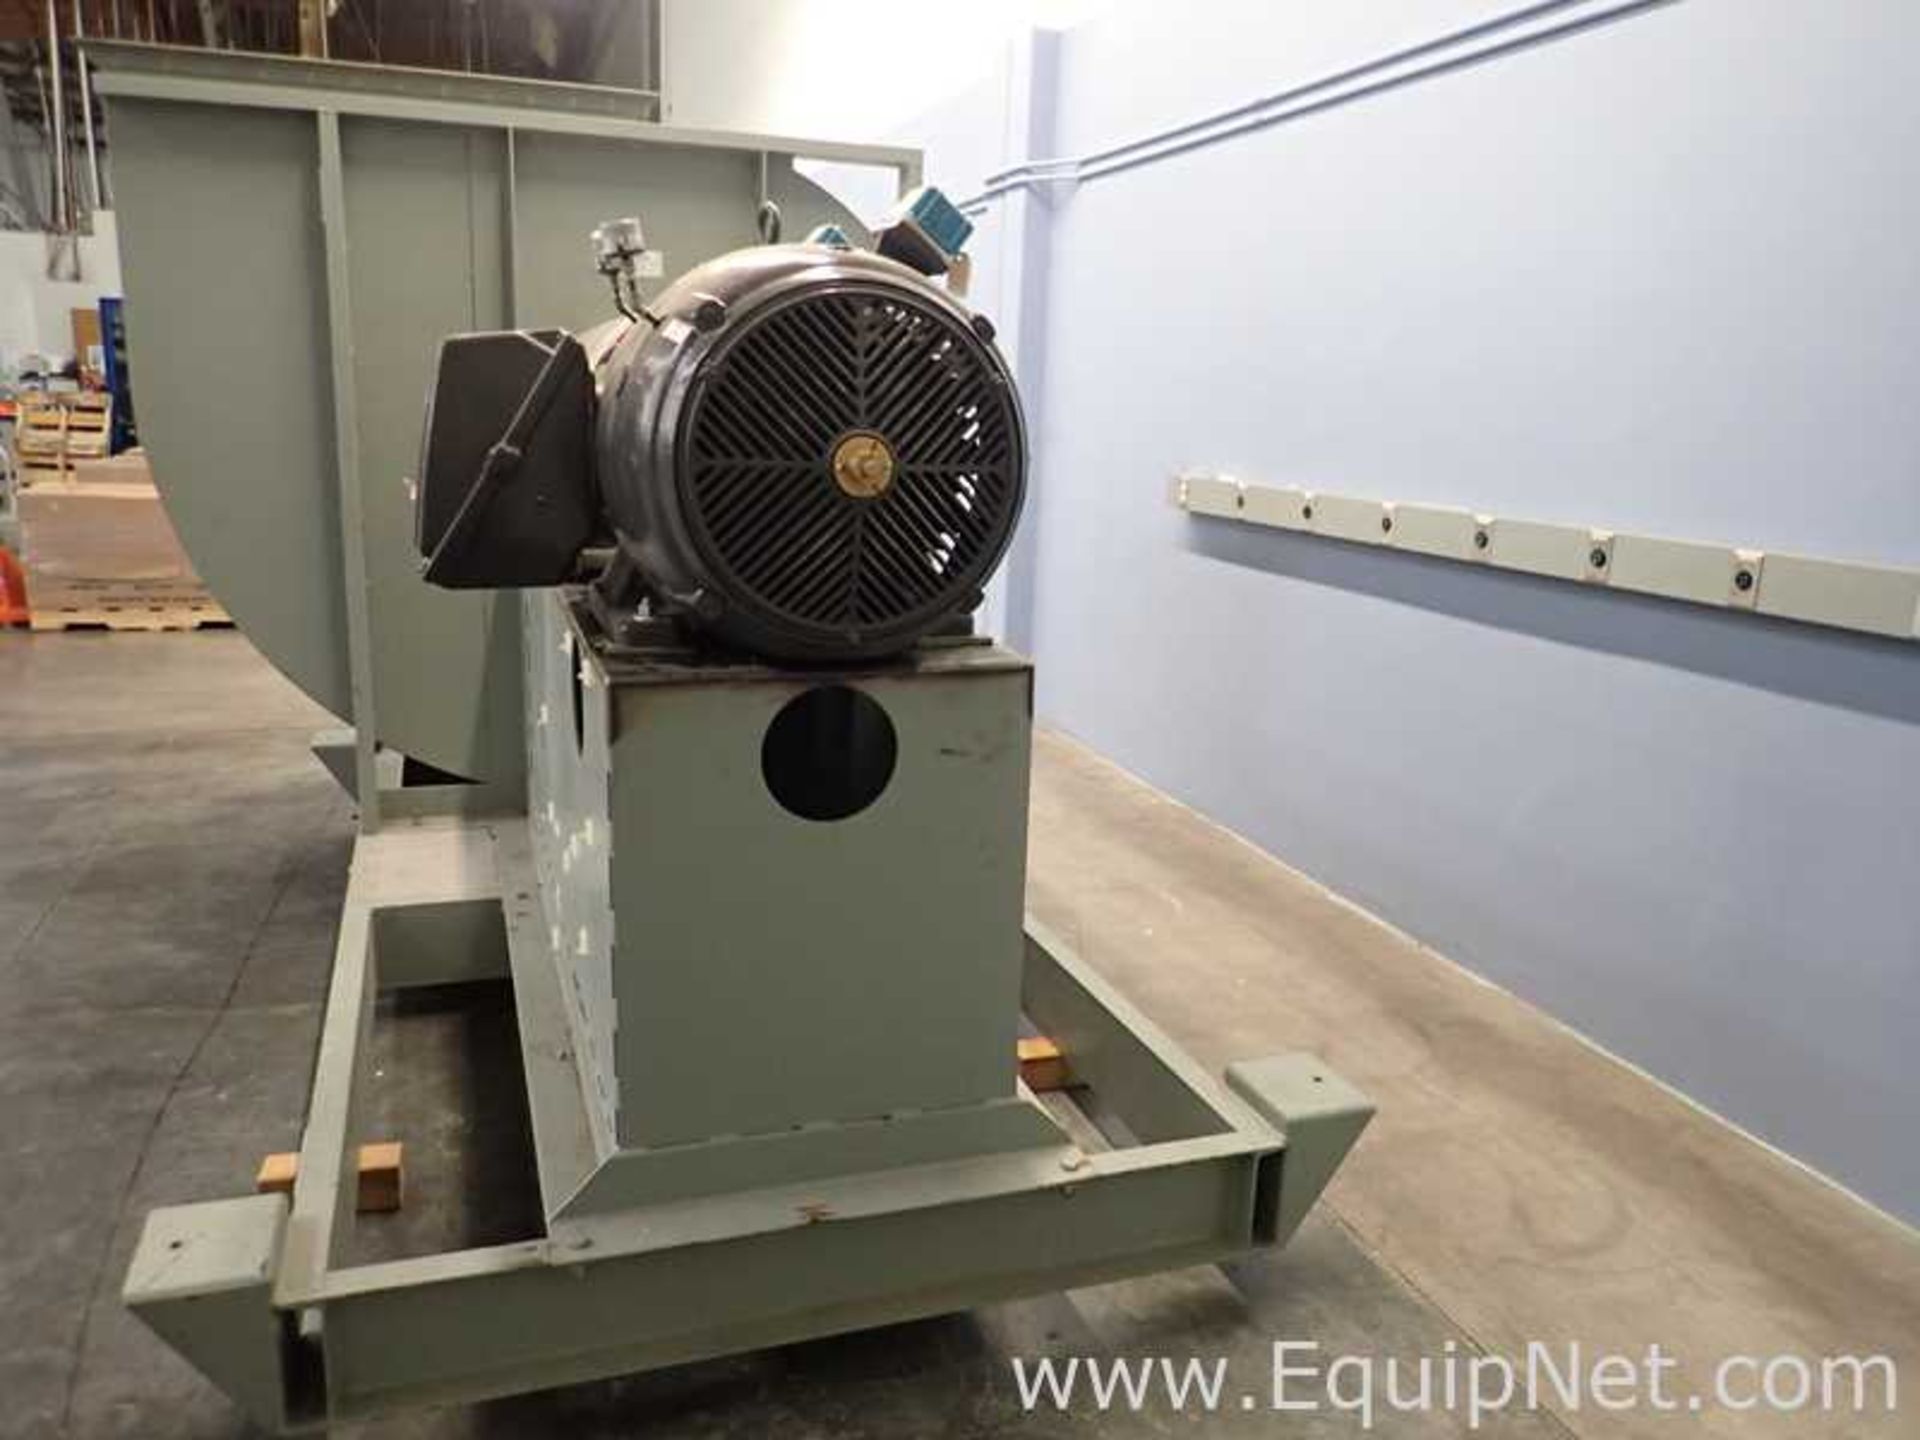 Pace Company CL 44ARRG8 General Air Handler Fan and Motor - Image 11 of 47